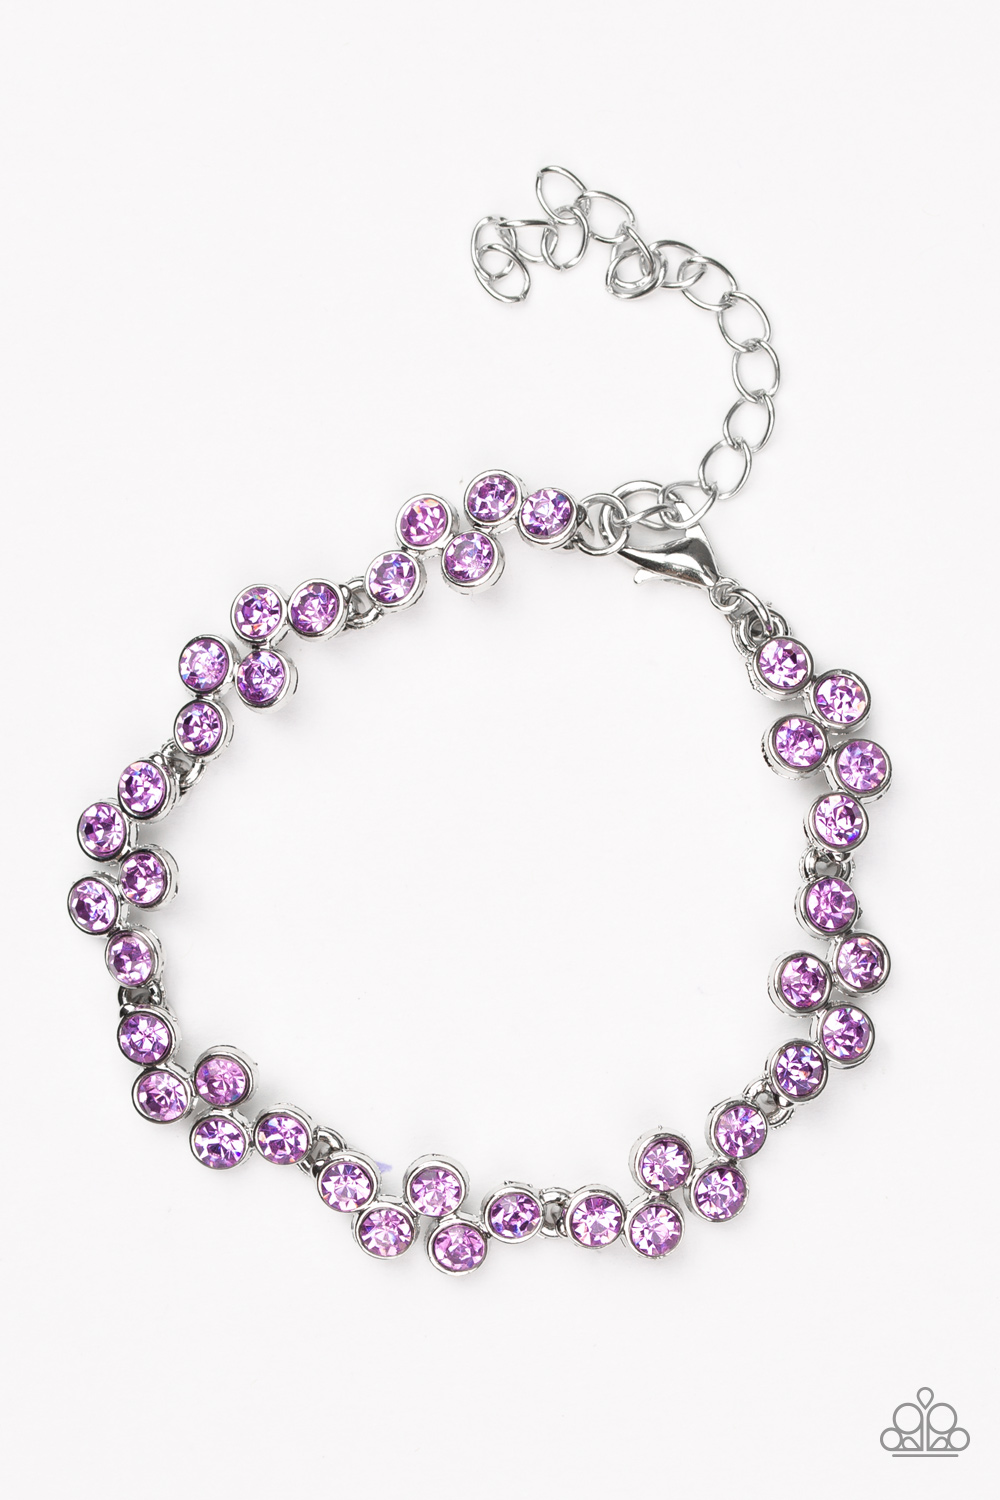 Still GLOWING Strong - Purple - Paparazzi $5 Jewelry Join or Shop Online